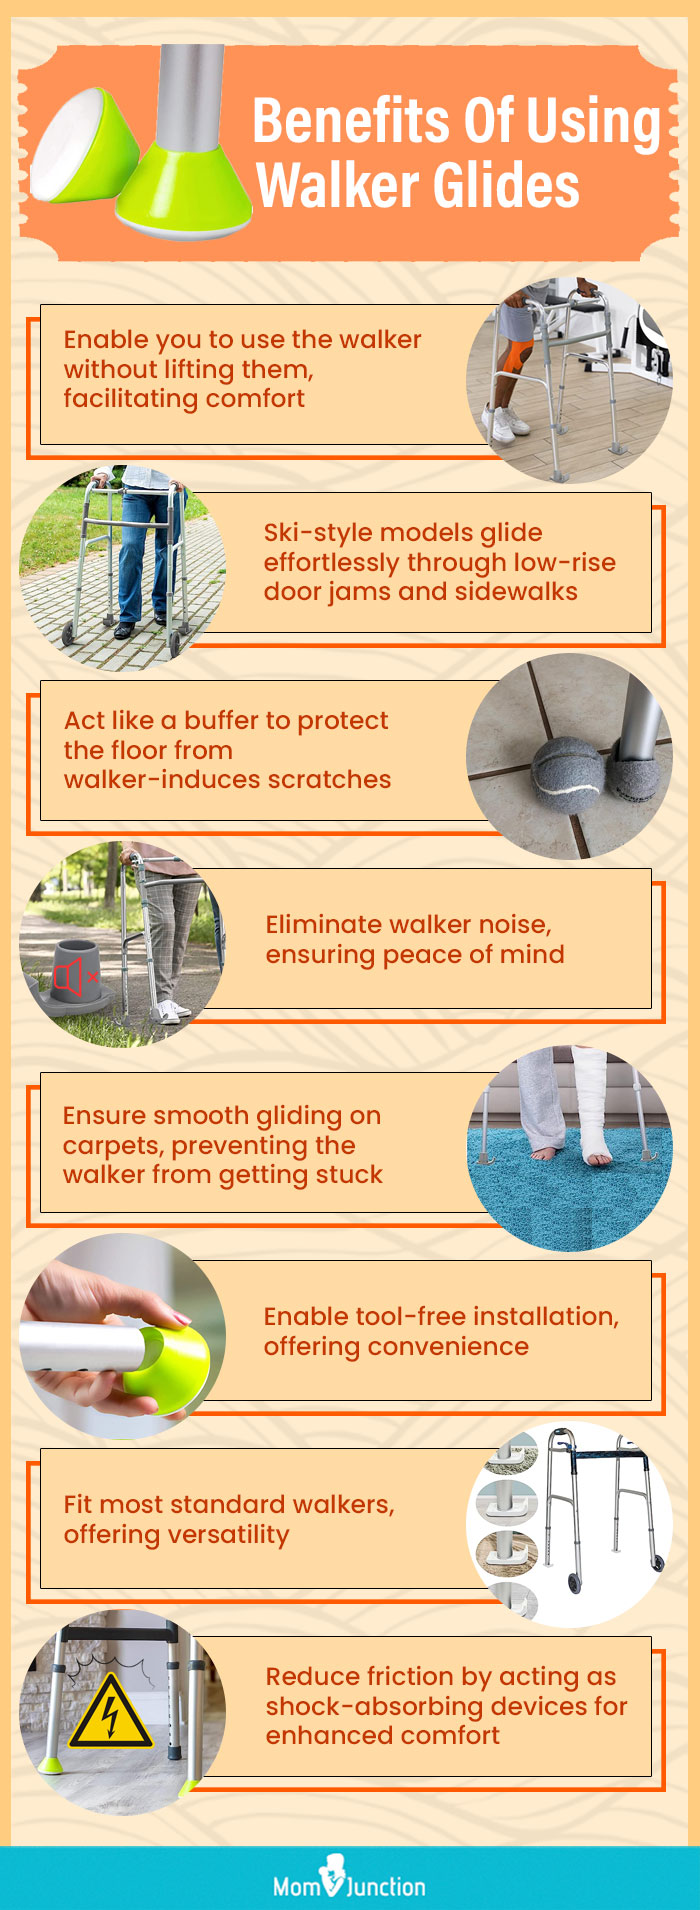 Benefits Of Using Walker Glides (infographic)